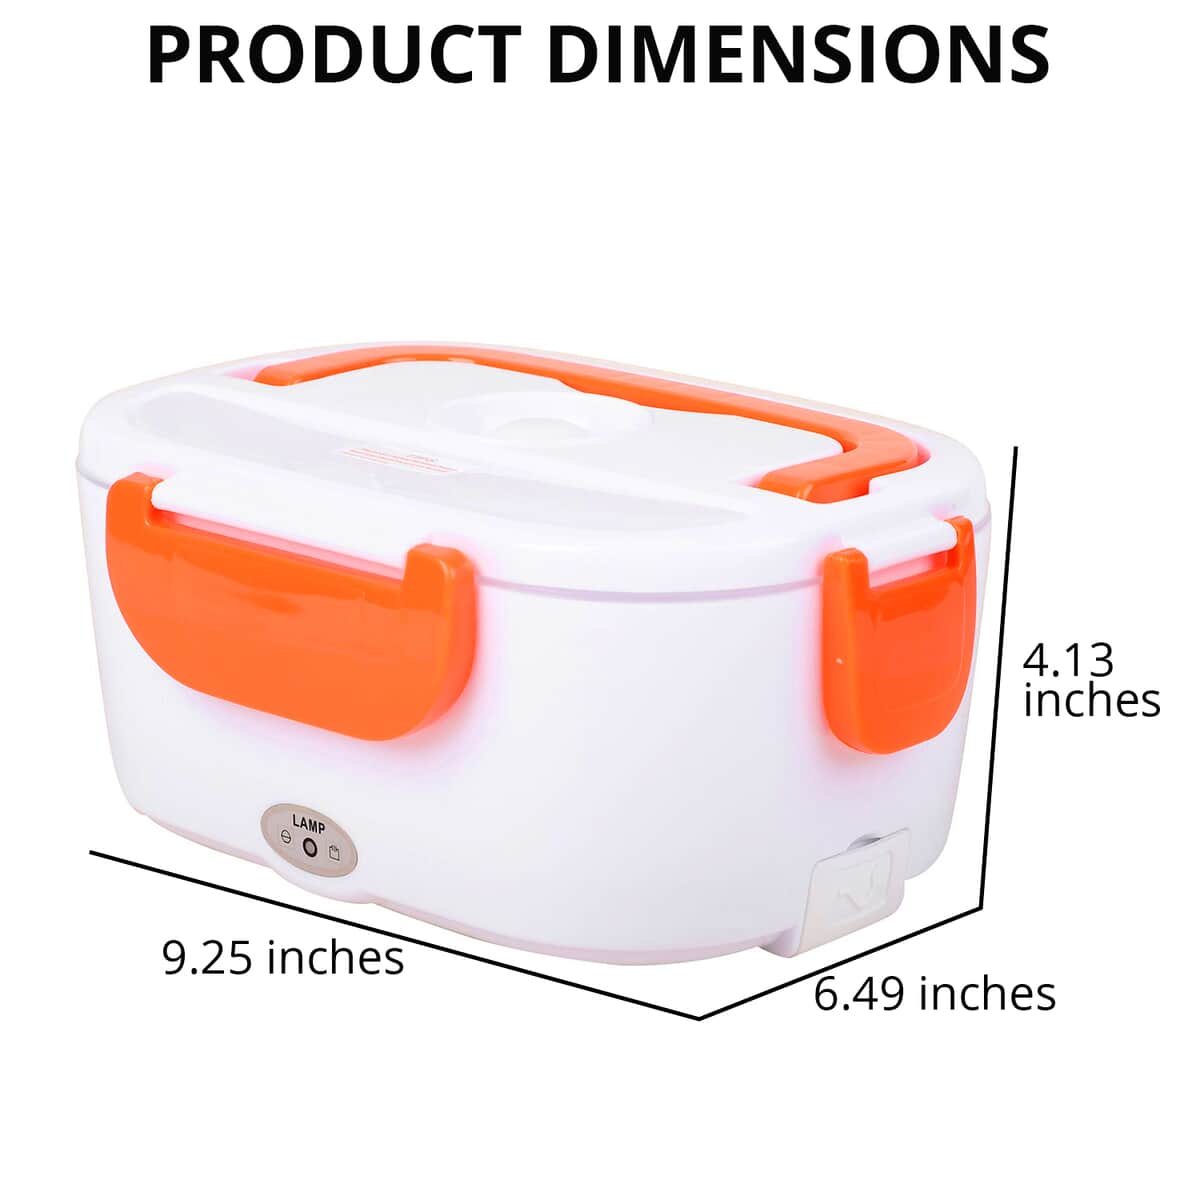 White & Orange Portable Electric Heating Lunch Box - 40W, Best Electric Heating Lunch Box, Bento Hot Heated Lunch Box, Best Lunch Box to Keep Food Hot image number 4